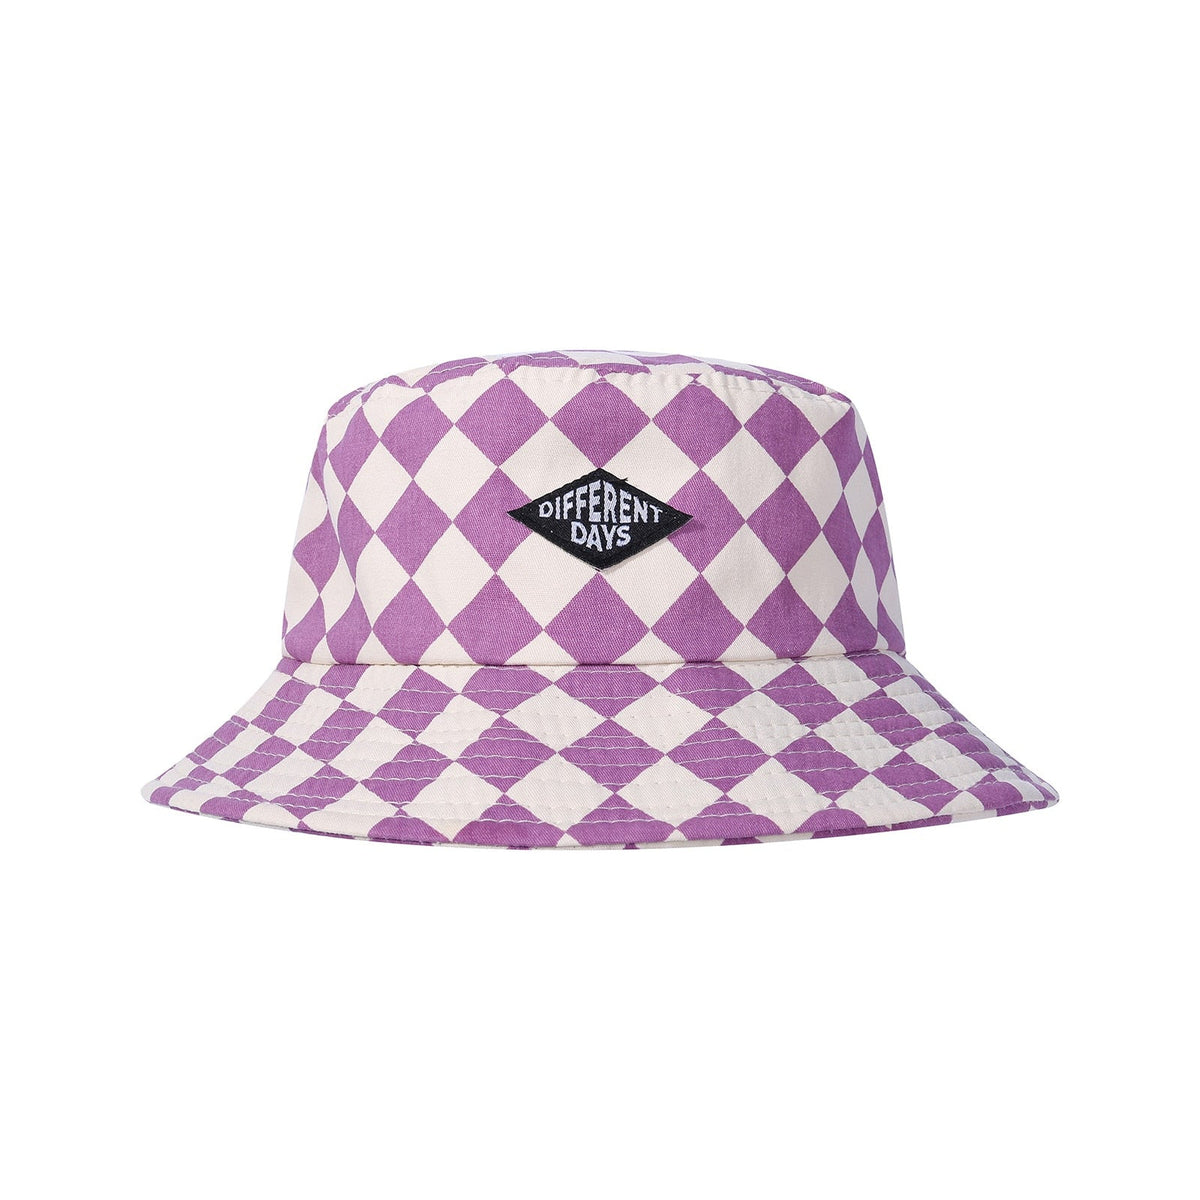 Checkerboard Bucket Hat - The Ollie Bee